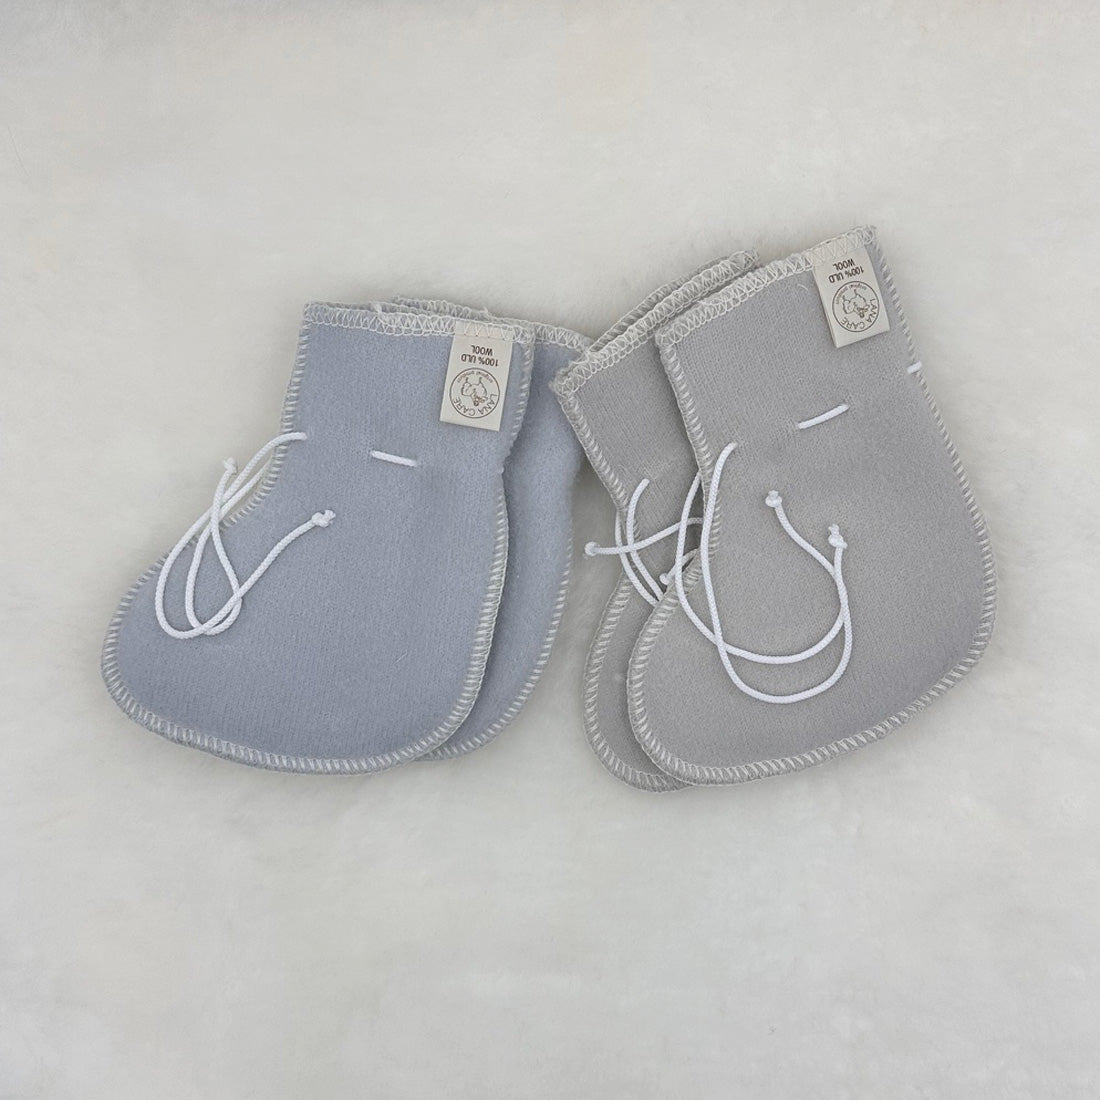 OUTLET LANACare Baby Booties in Organic Merino Wool - with synthetic ties